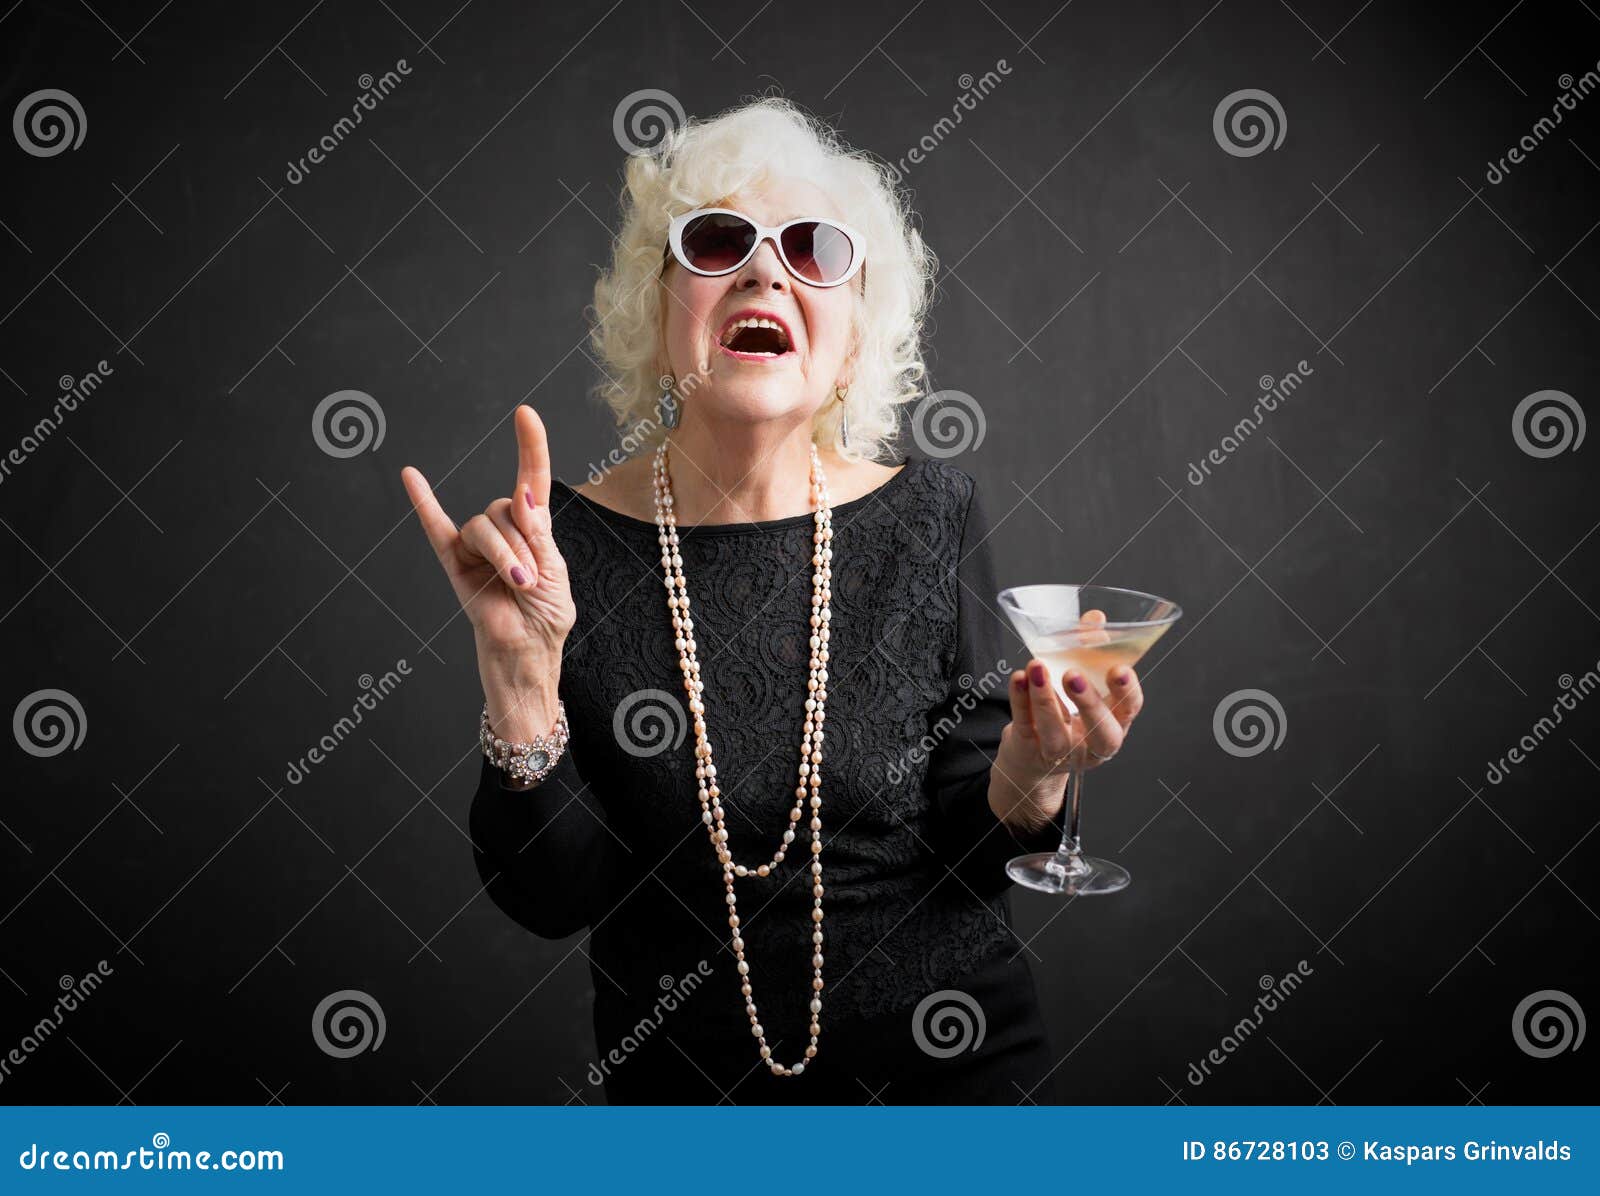 grandmother with sunglasses and drink in hand